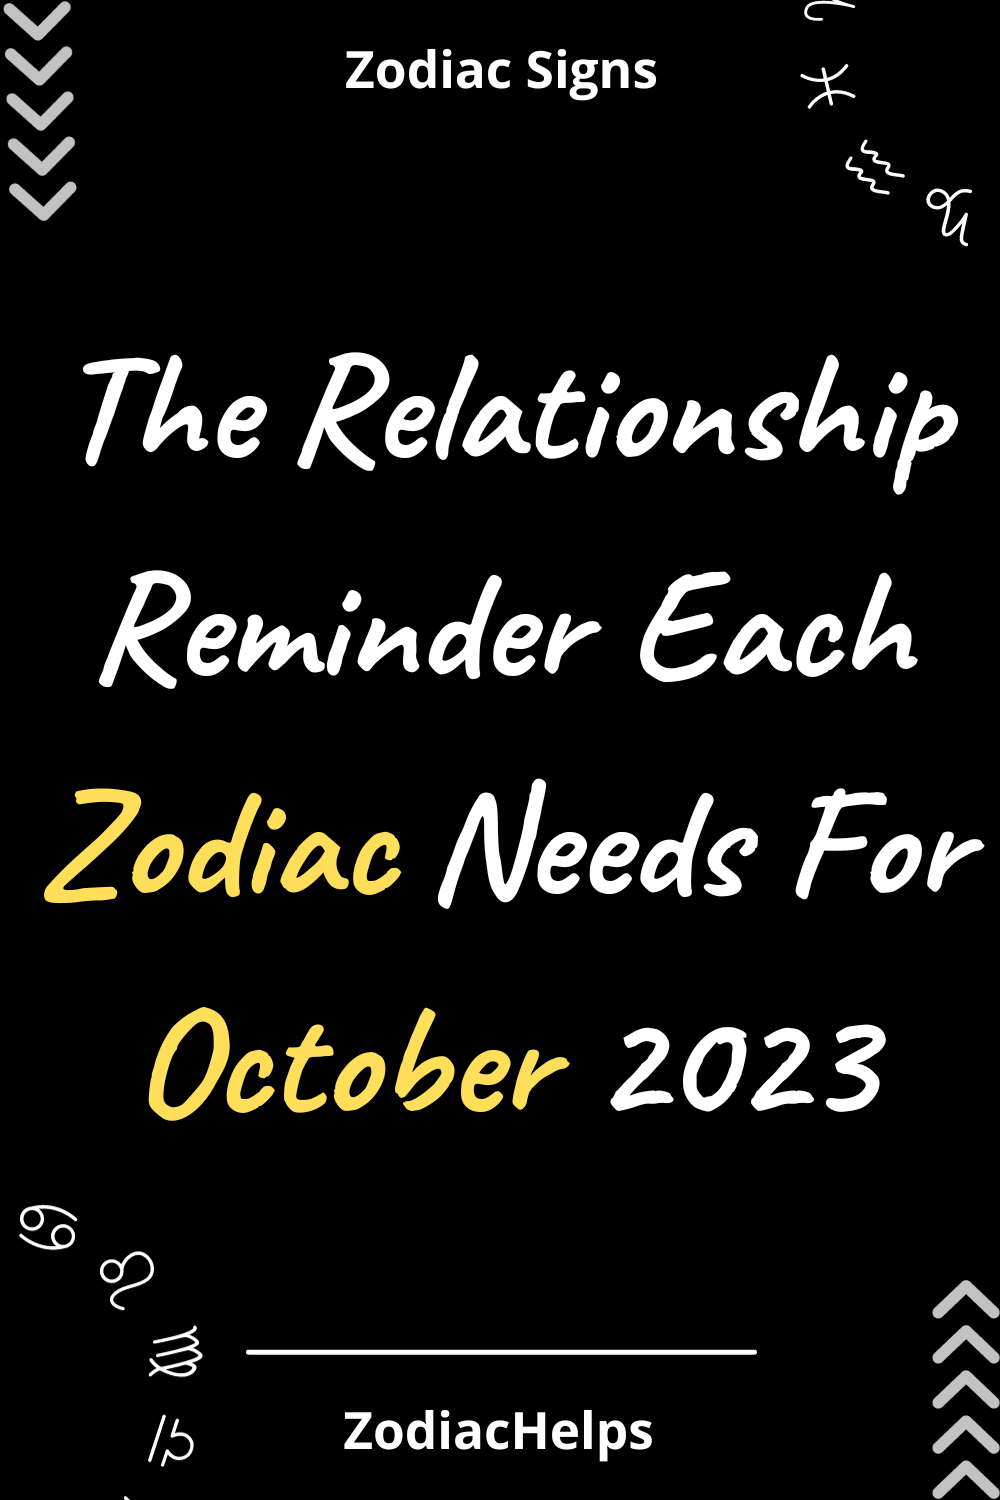 The Relationship Reminder Each Zodiac Needs For October 2023